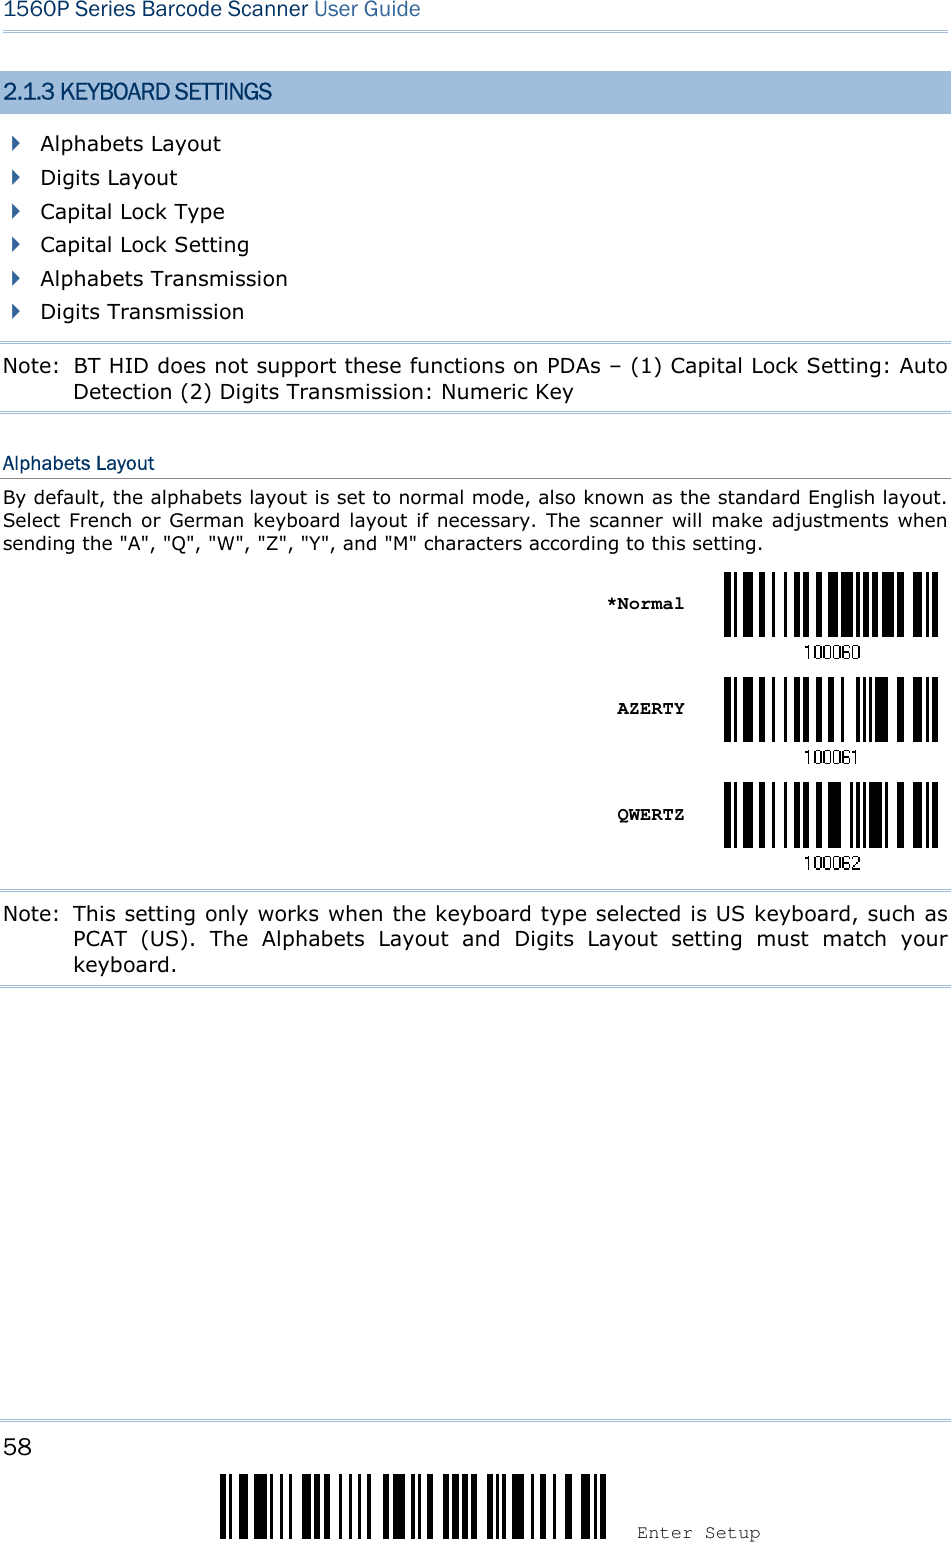 58 Enter Setup 1560P Series Barcode Scanner User Guide 2.1.3 KEYBOARD SETTINGS Alphabets LayoutDigits LayoutCapital Lock TypeCapital Lock SettingAlphabets TransmissionDigits TransmissionNote:   BT HID does not support these functions on PDAs – (1) Capital Lock Setting: Auto Detection (2) Digits Transmission: Numeric Key Alphabets Layout By default, the alphabets layout is set to normal mode, also known as the standard English layout. Select  French or German keyboard layout  if necessary. The scanner will make  adjustments when sending the &quot;A&quot;, &quot;Q&quot;, &quot;W&quot;, &quot;Z&quot;, &quot;Y&quot;, and &quot;M&quot; characters according to this setting. *NormalAZERTY QWERTZ Note:  This setting only works when the keyboard type selected is US keyboard, such as PCAT  (US).  The  Alphabets  Layout  and  Digits  Layout  setting  must  match  your keyboard. 